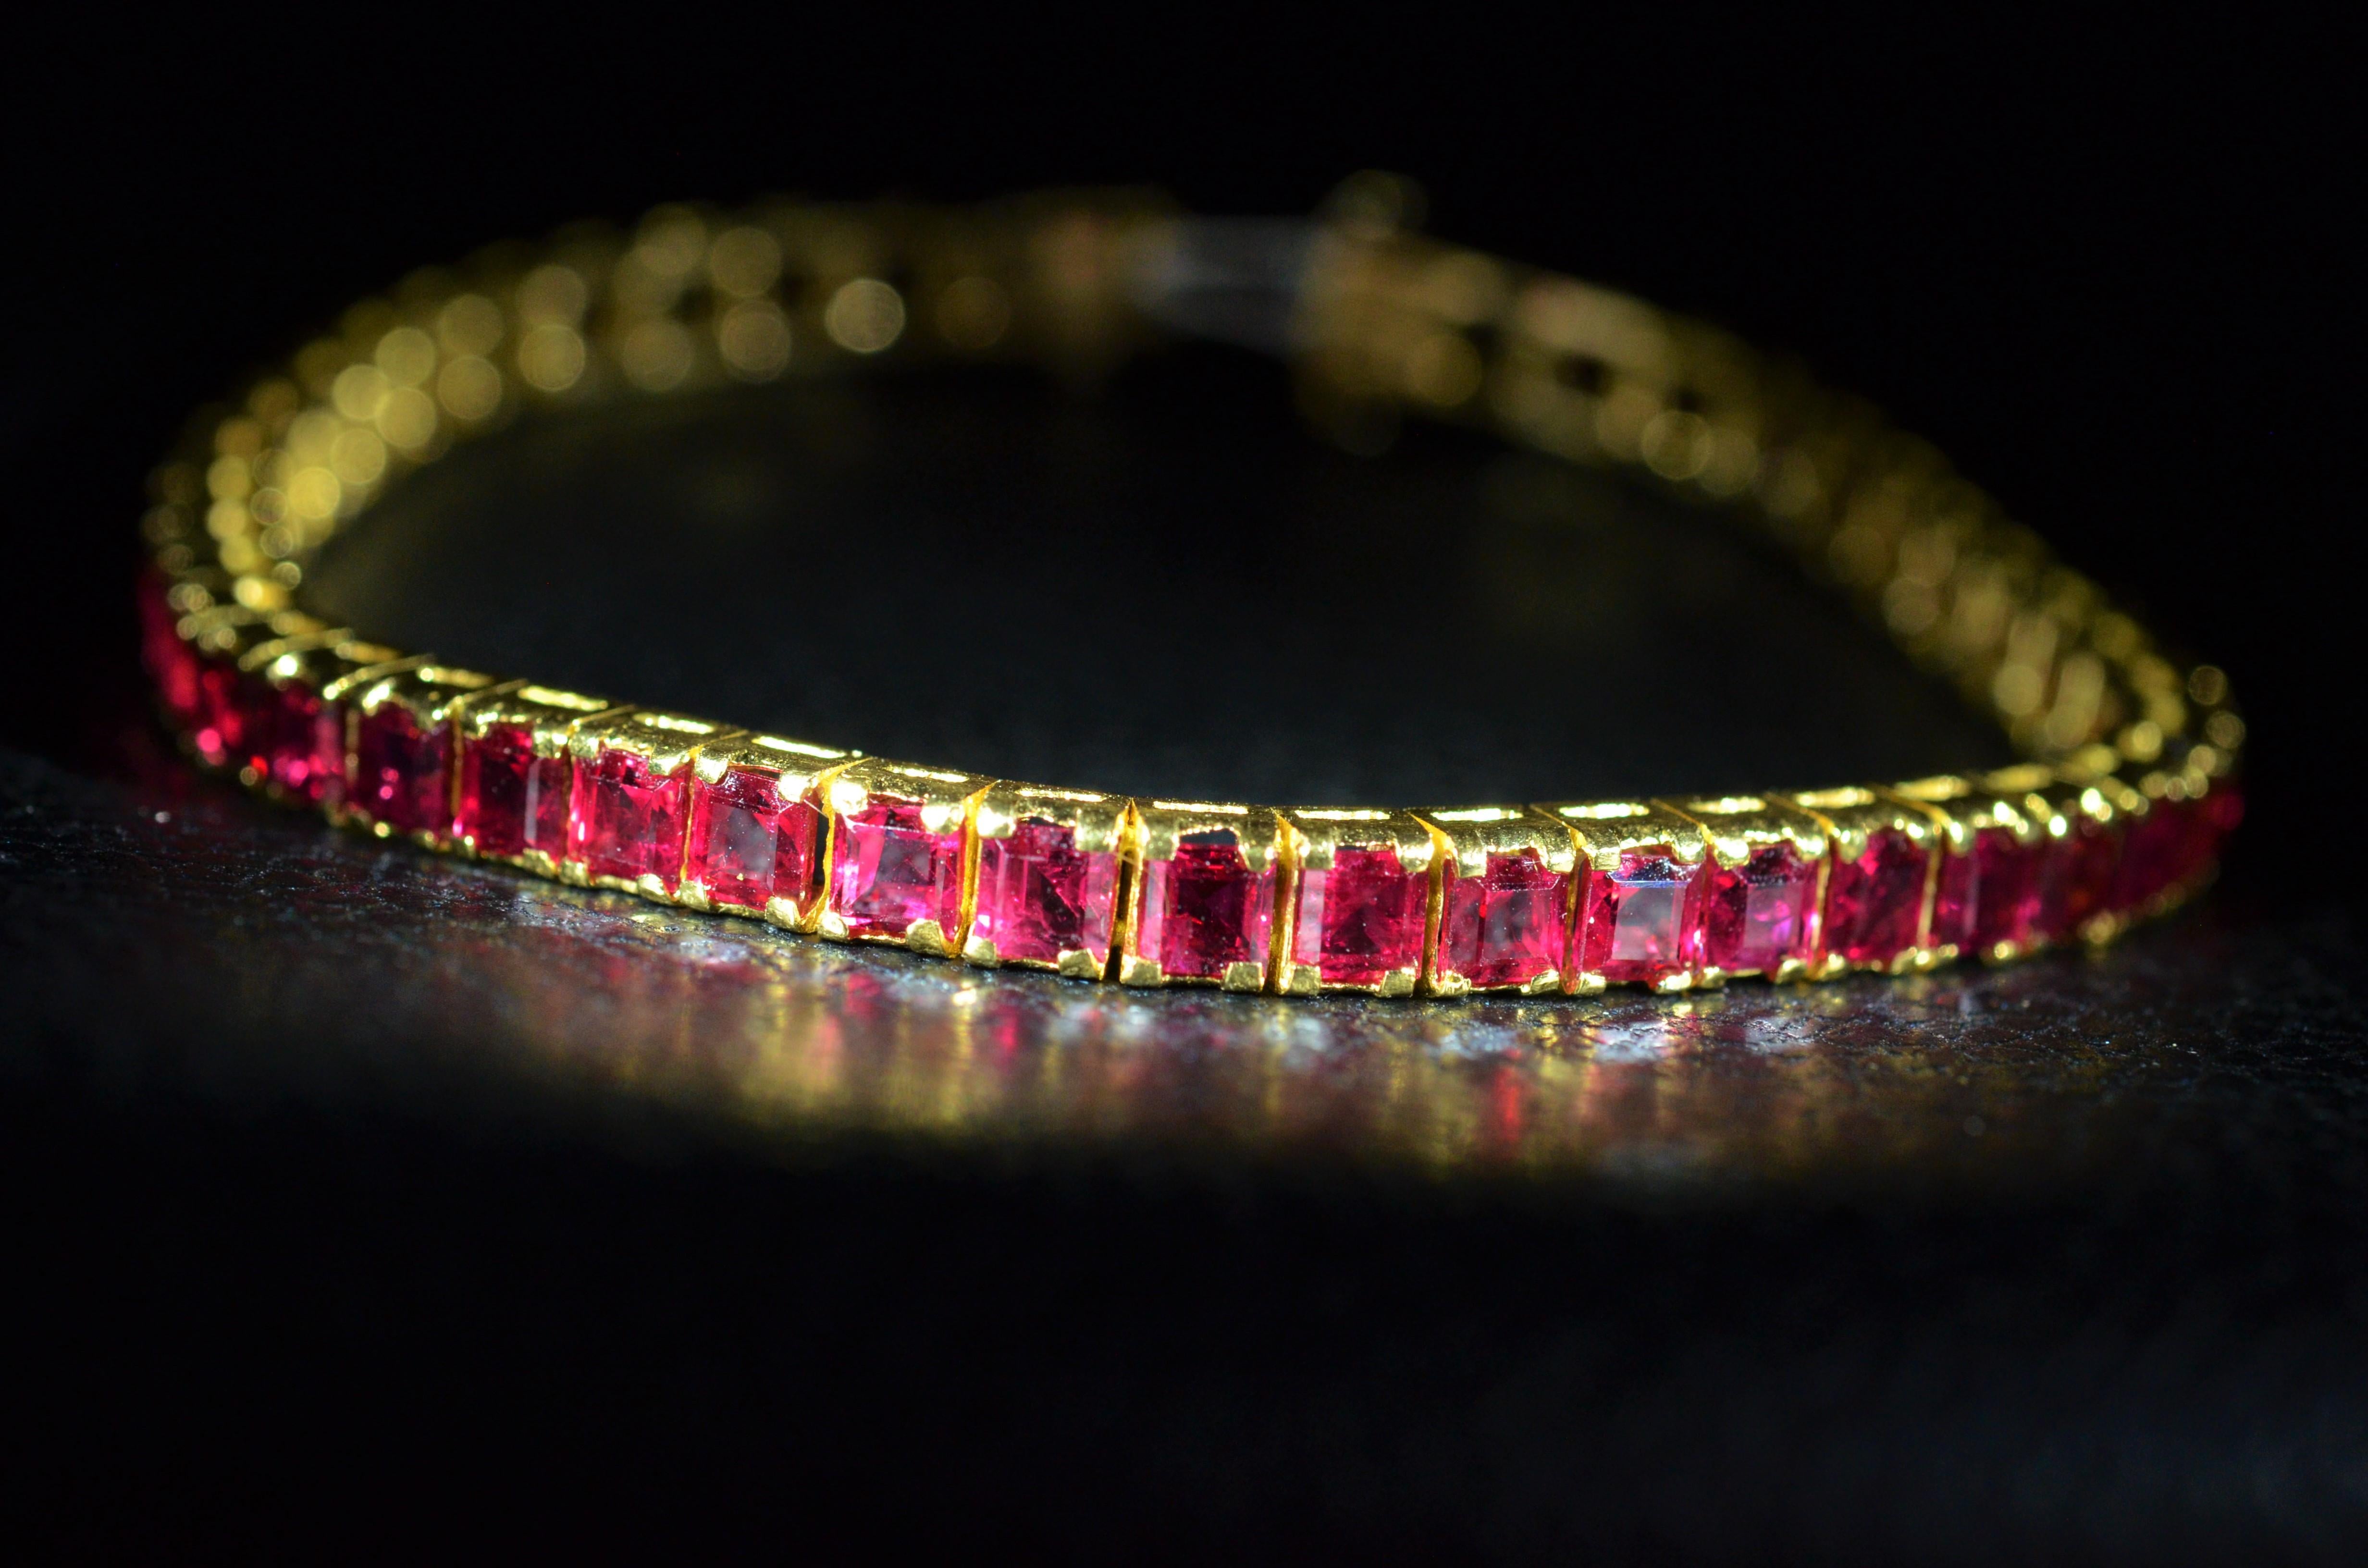 Incredible Burma Ruby Bracelet with Square Emerald Cut Rubies in 18 Karat In Excellent Condition For Sale In Warrington, PA